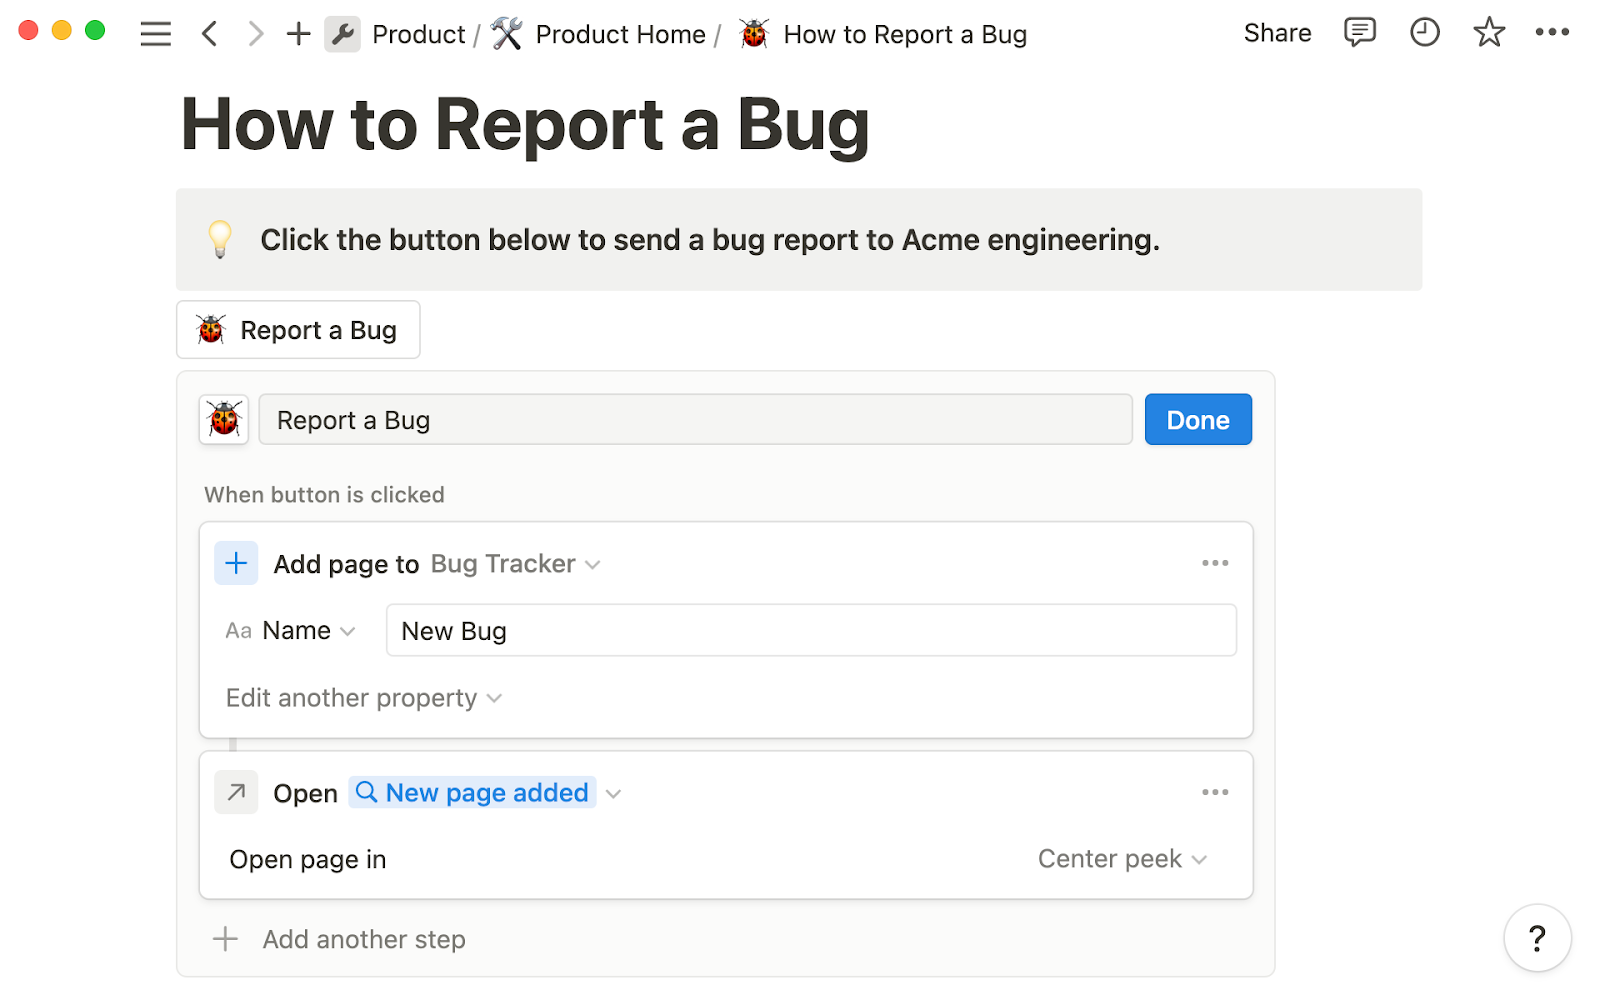 The Notion interface shows the configurations for creating a button for reporting a bug.